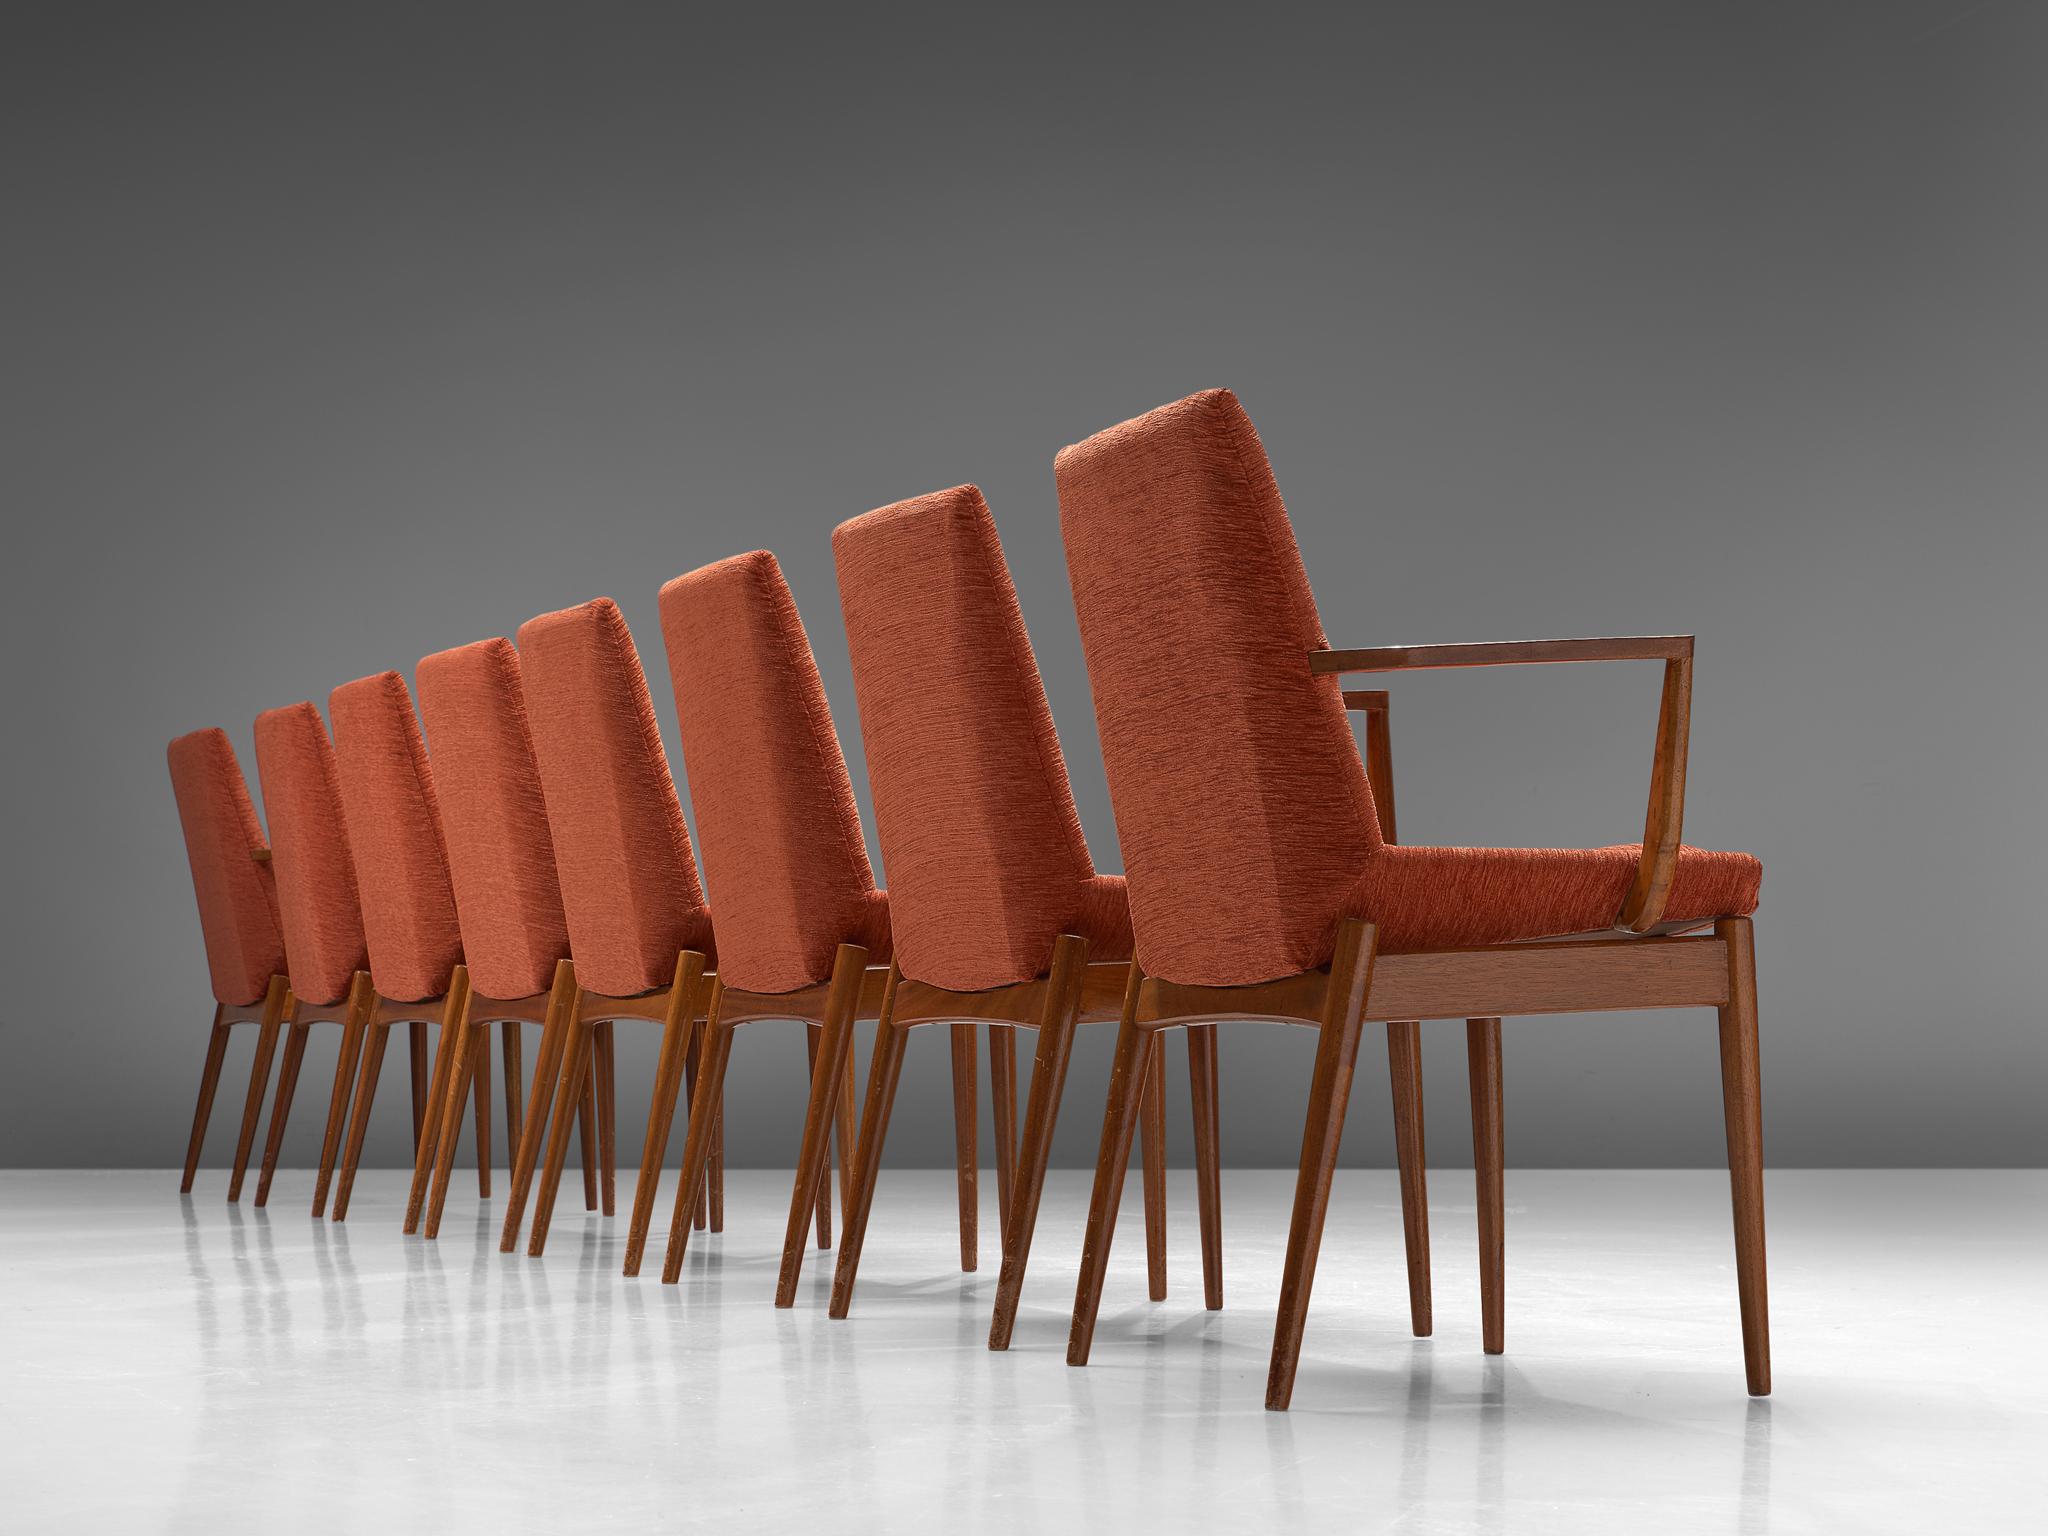 Mid-20th Century Scandinavian Armchairs in Teak and Red/Orange Cord Upholstery